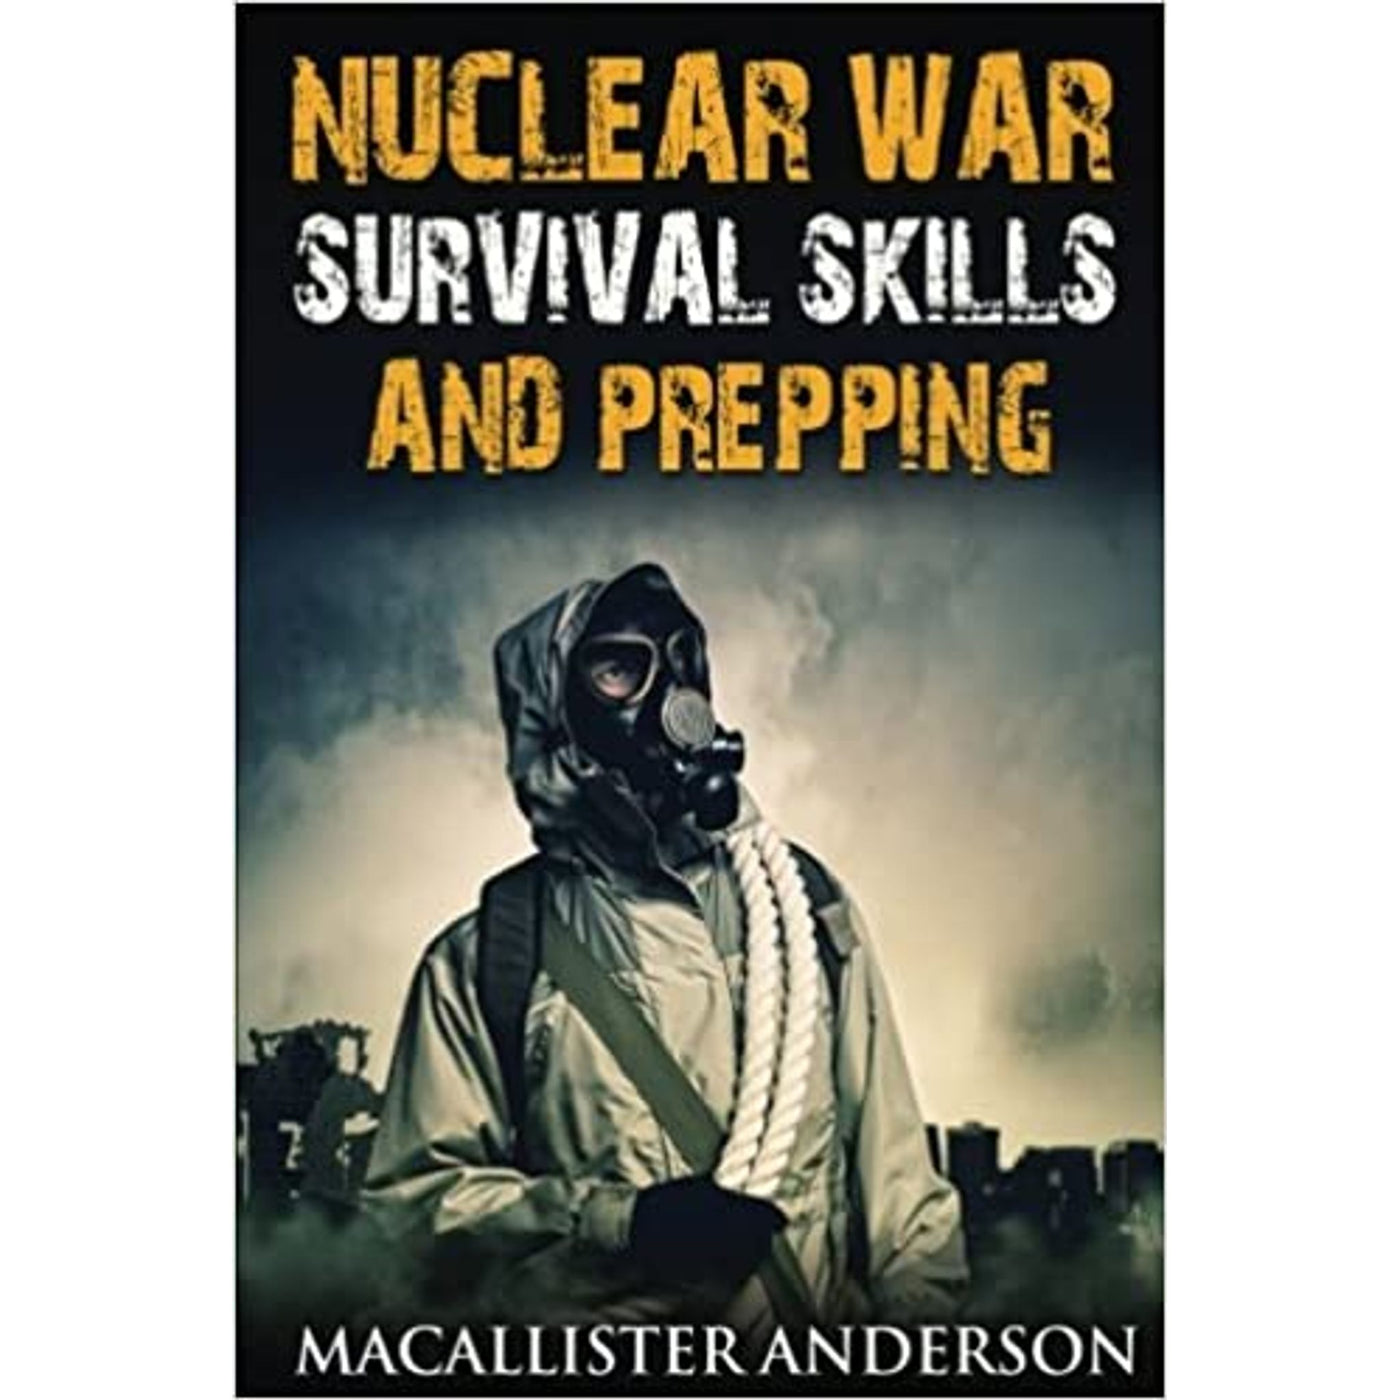 Nuclear War Survival Skills and Prepping